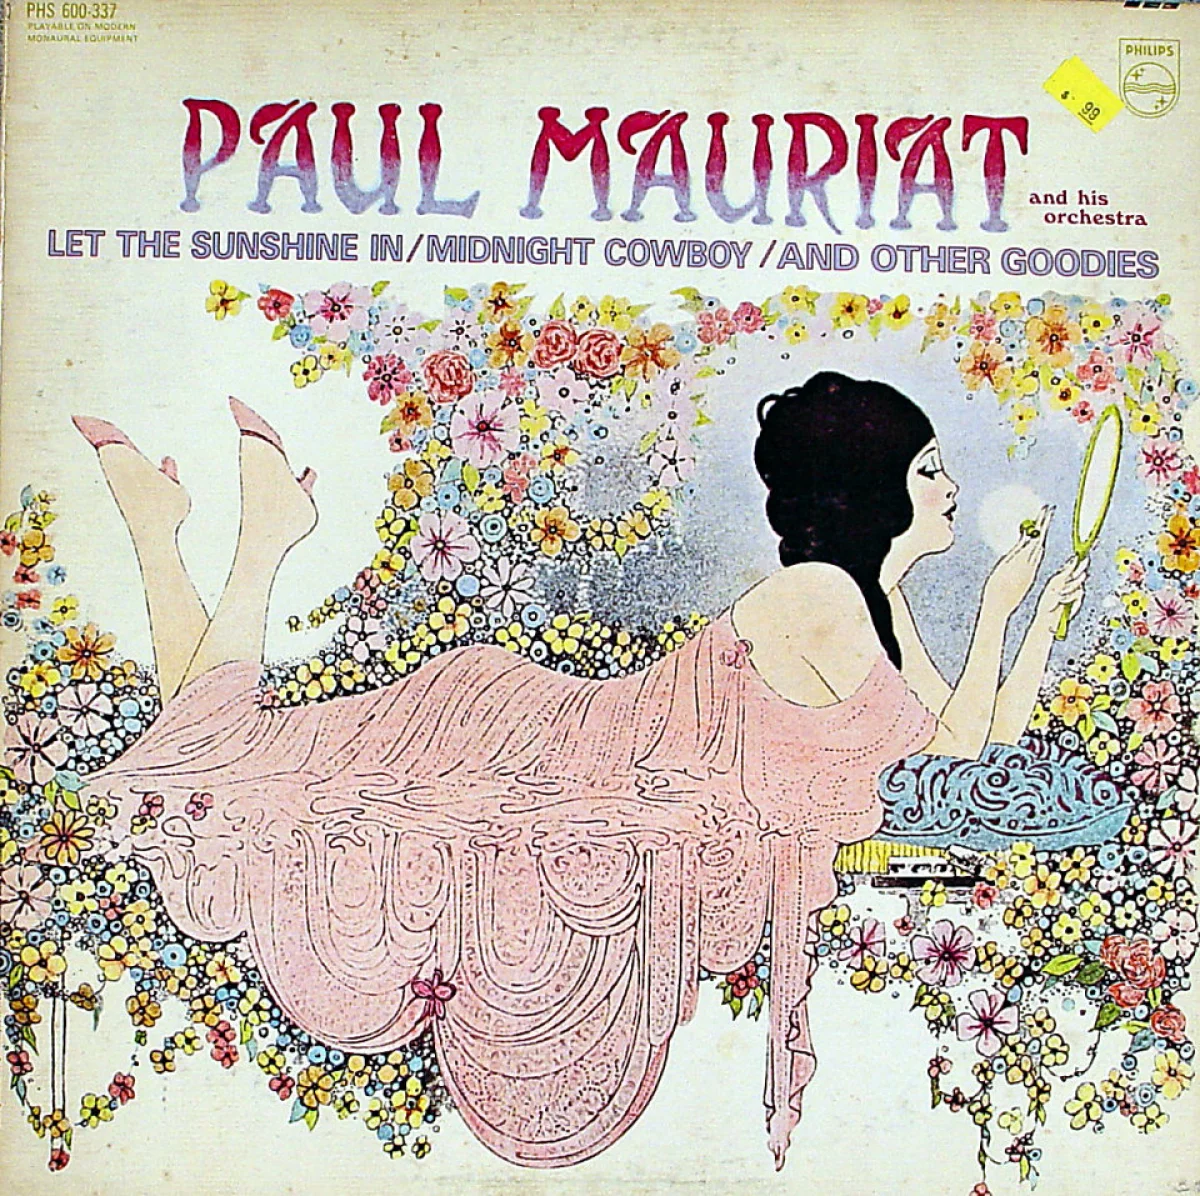 Paul Mauriat And His Orchestra Vinyl 12